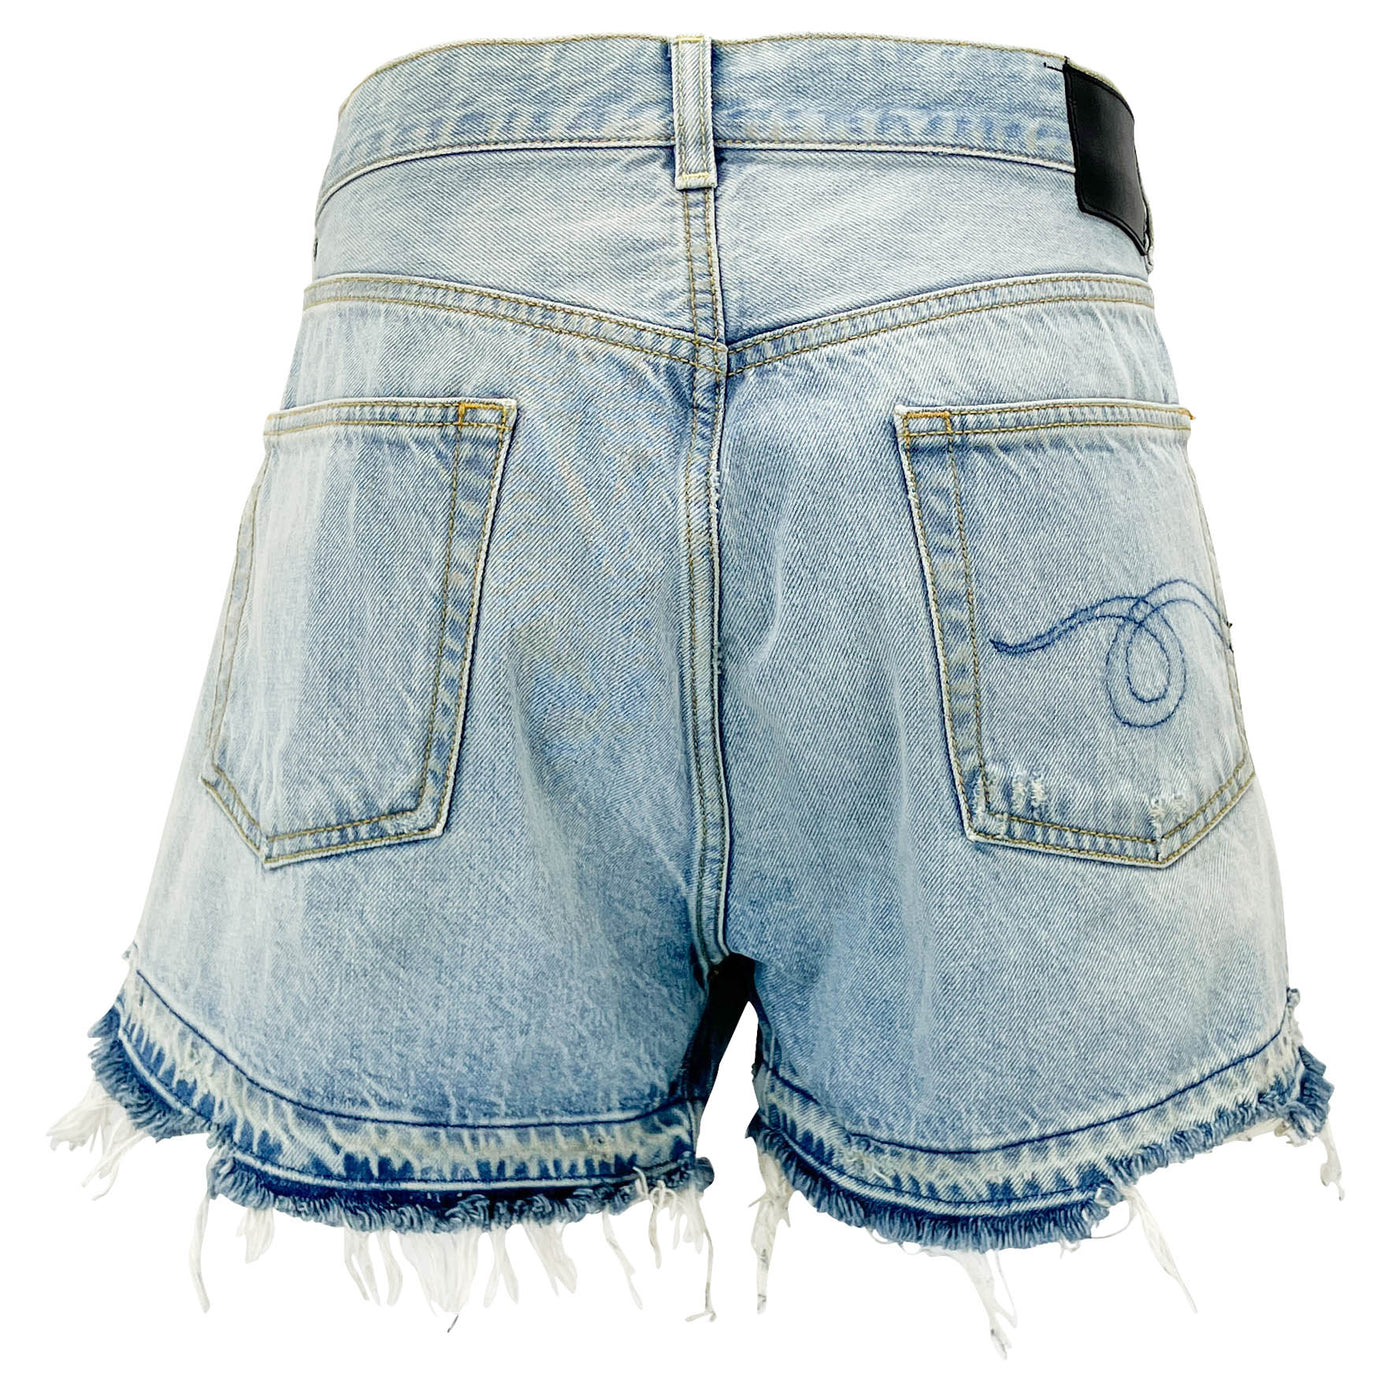 R13 Crossover Shorts in Tilly With Let Down Hem - Discounts on R13 at UAL